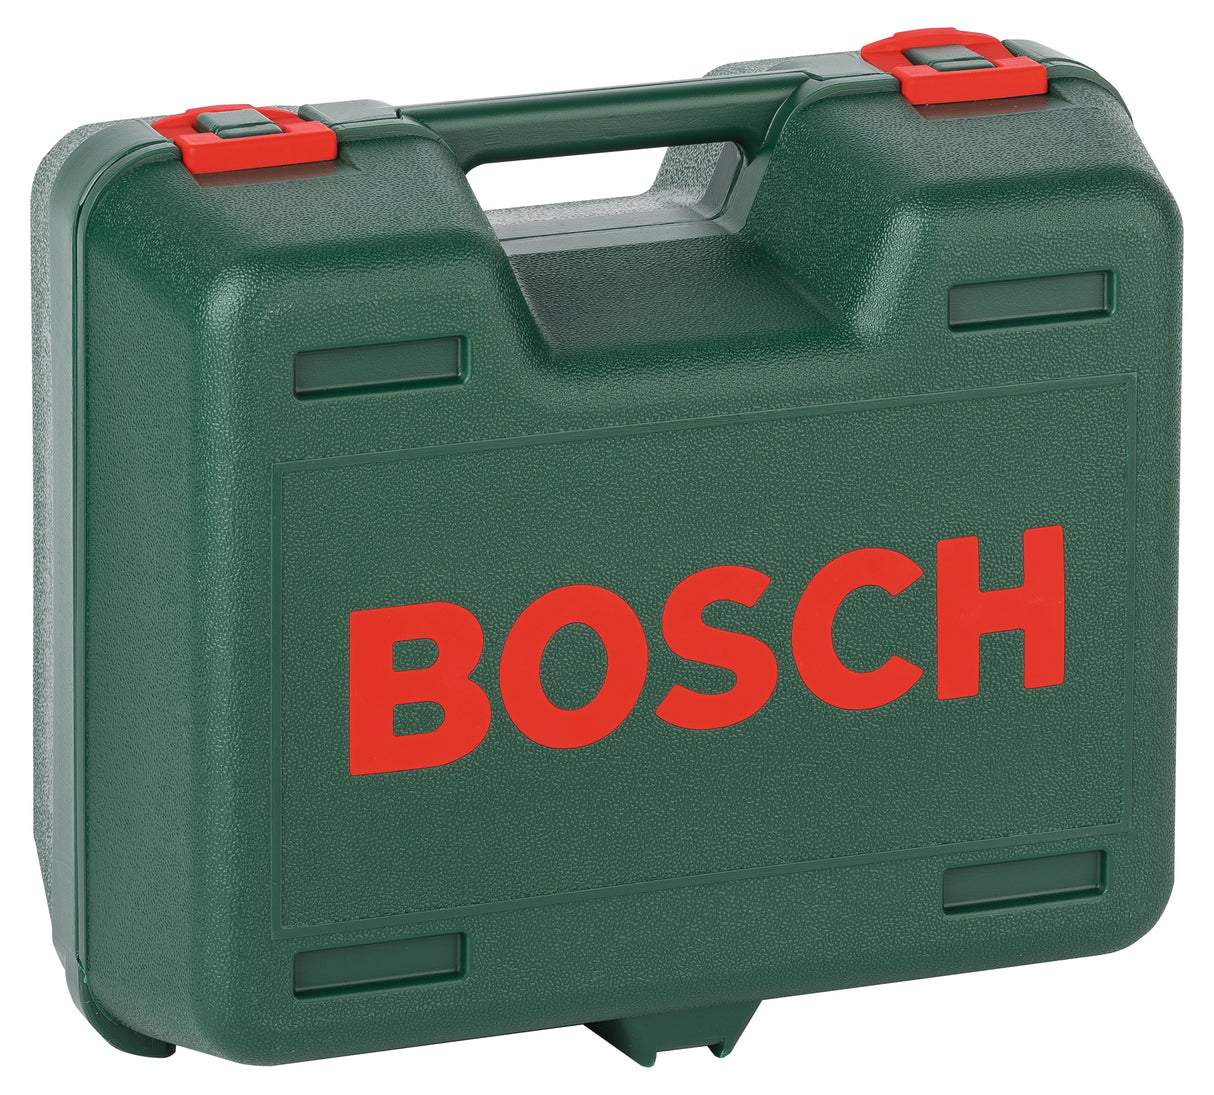 Bosch Professional Carrying Case for PKS 46 and PKS 54 with Plastic Case